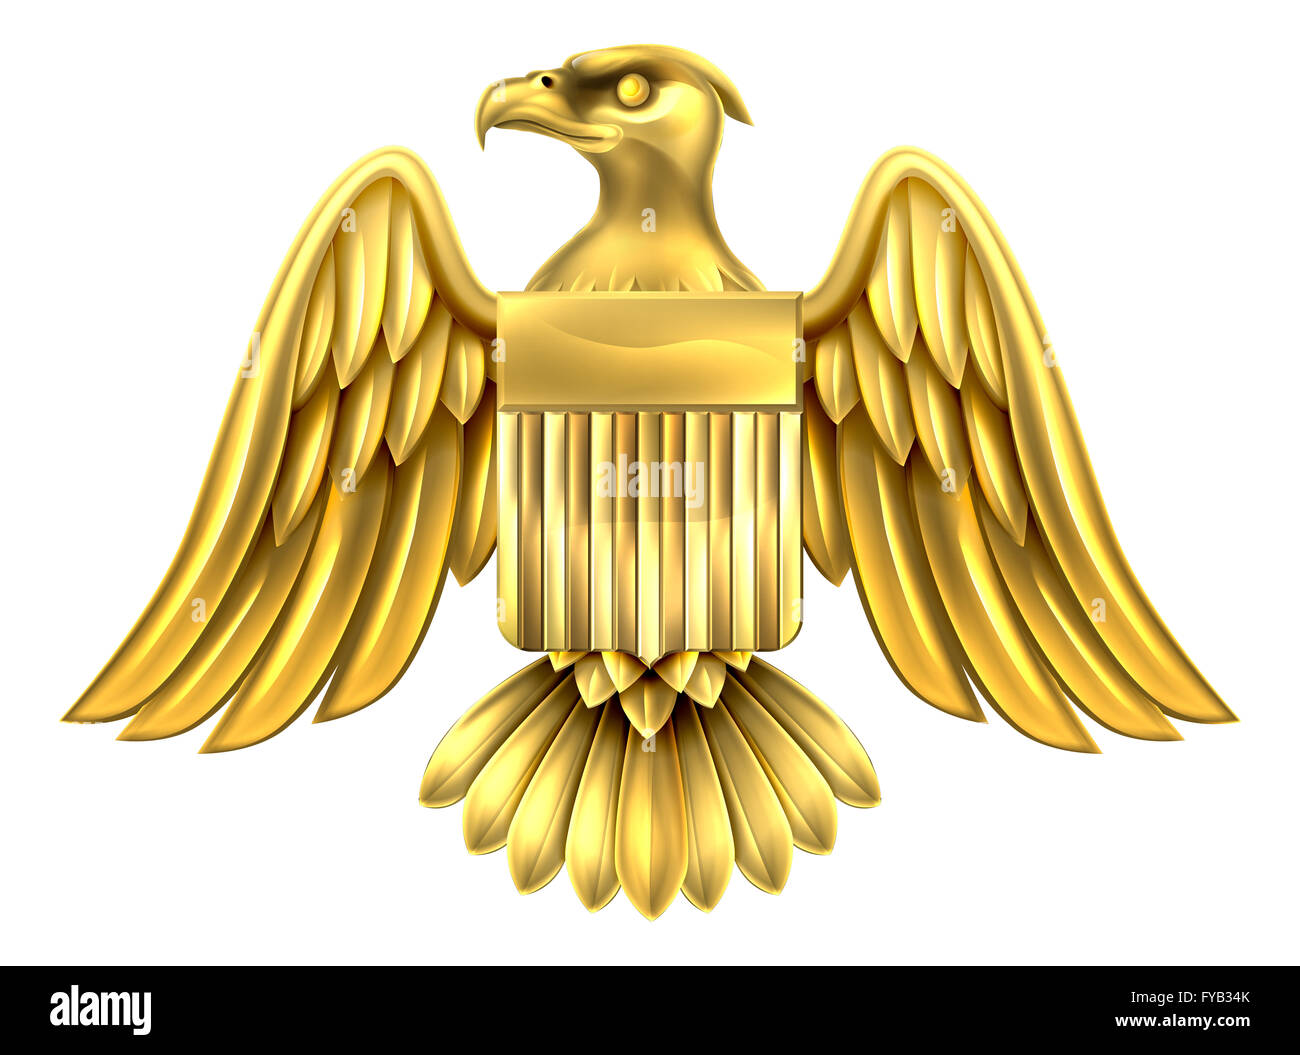 Gold metal American Eagle Design with bald eagle of the United States with American flag shield Stock Photo